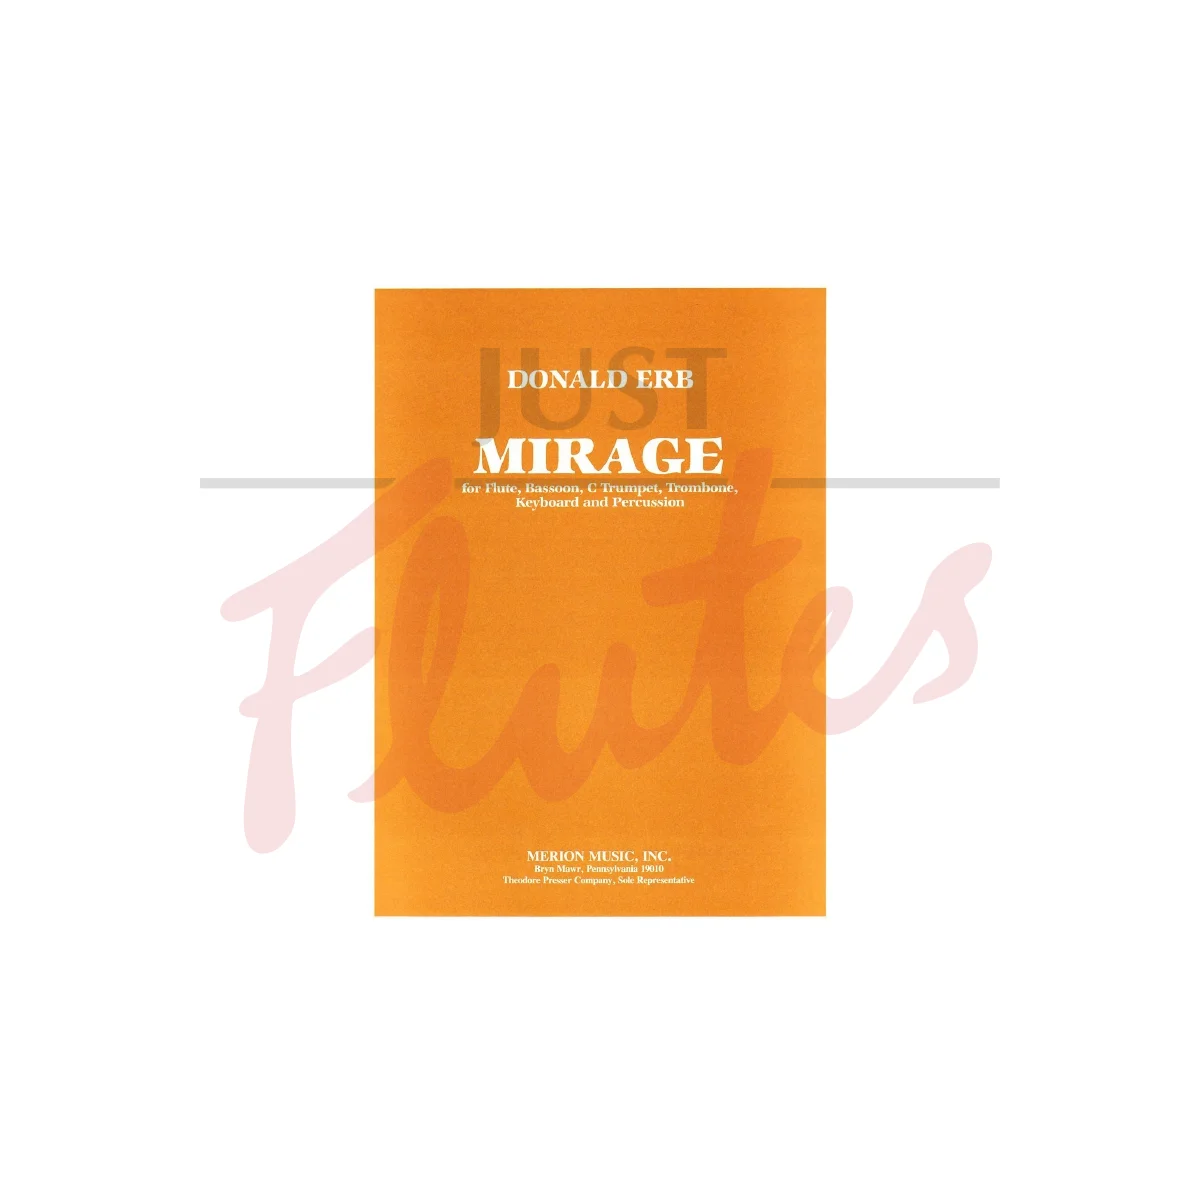 Mirage for Flute, Bassoon, Trumpet, Trombone, Keyboard and Percussion